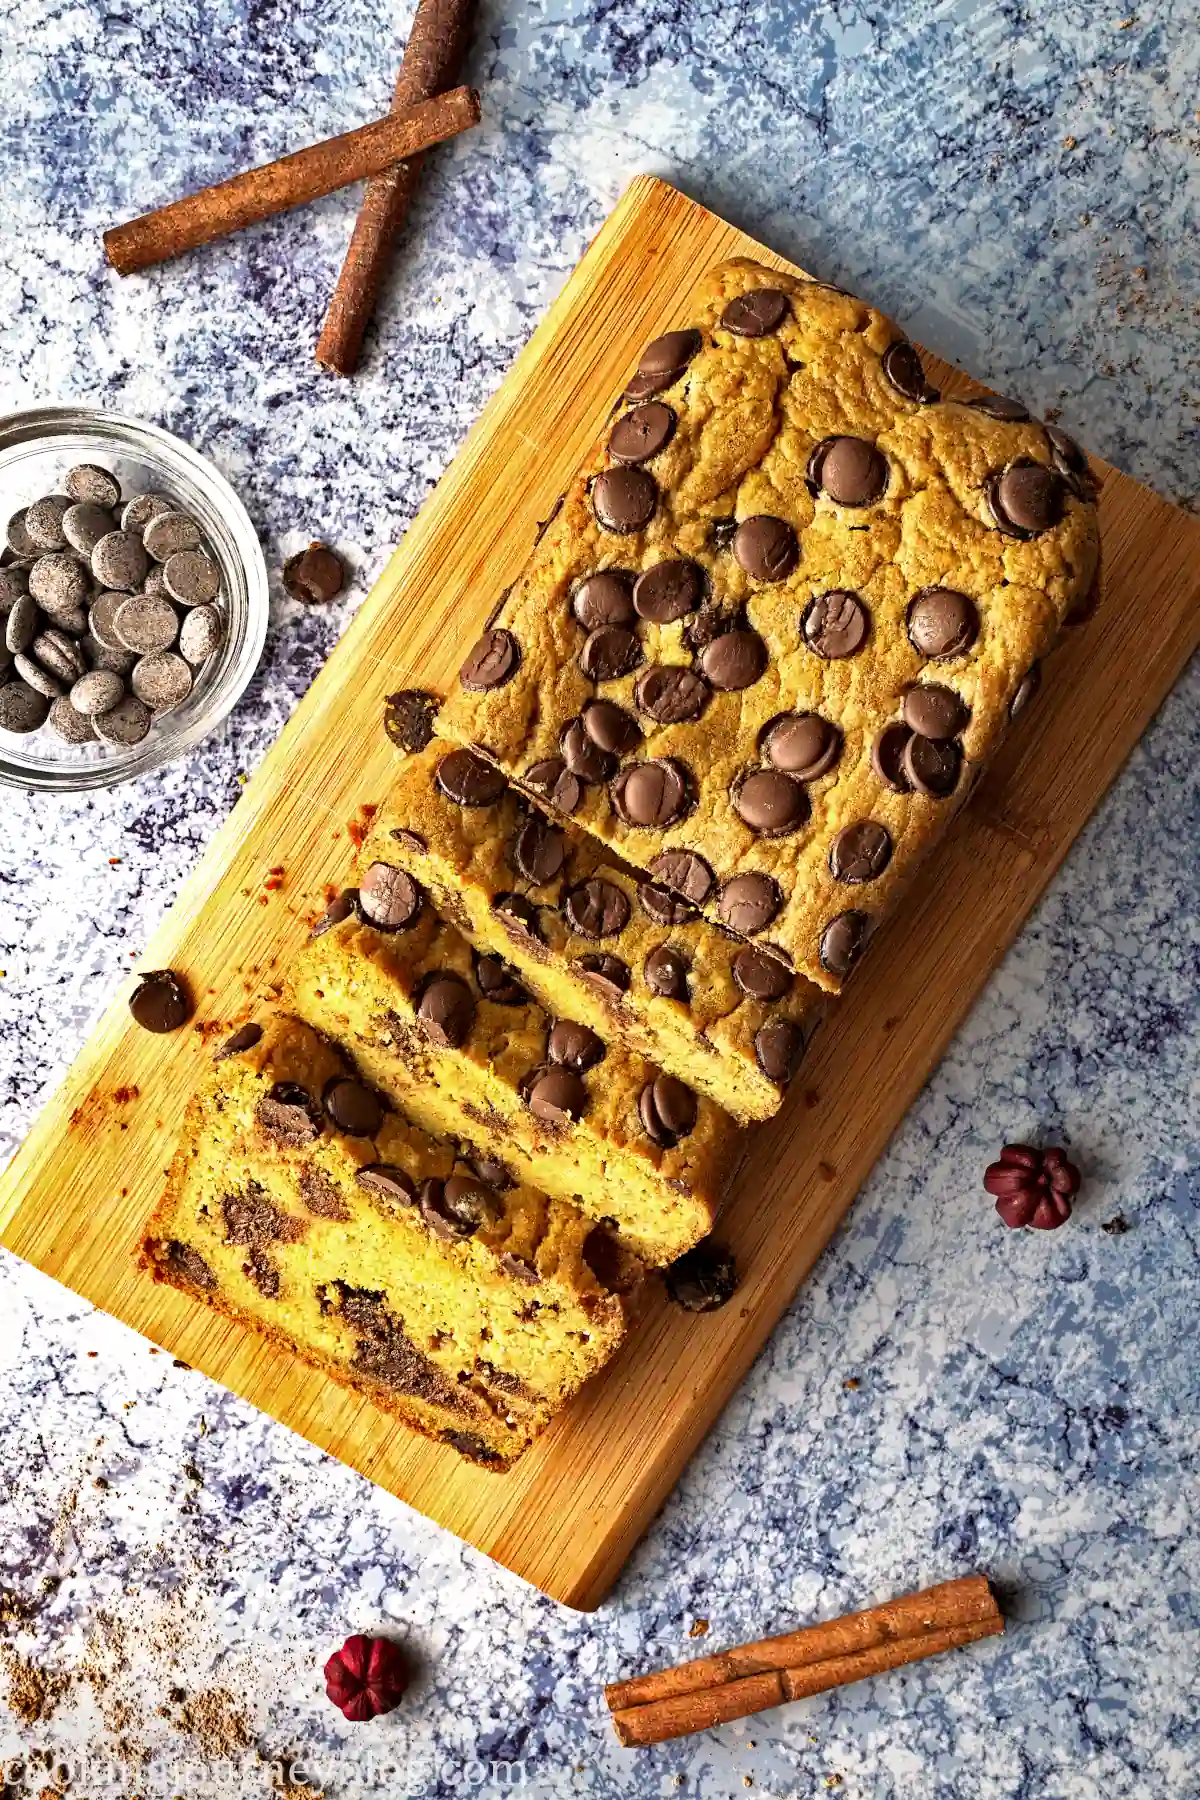 Half sliced pumpkin chocolate chip bread on a wooden board, served on a blue table with extra chocolate chips and cinnamon sticks.